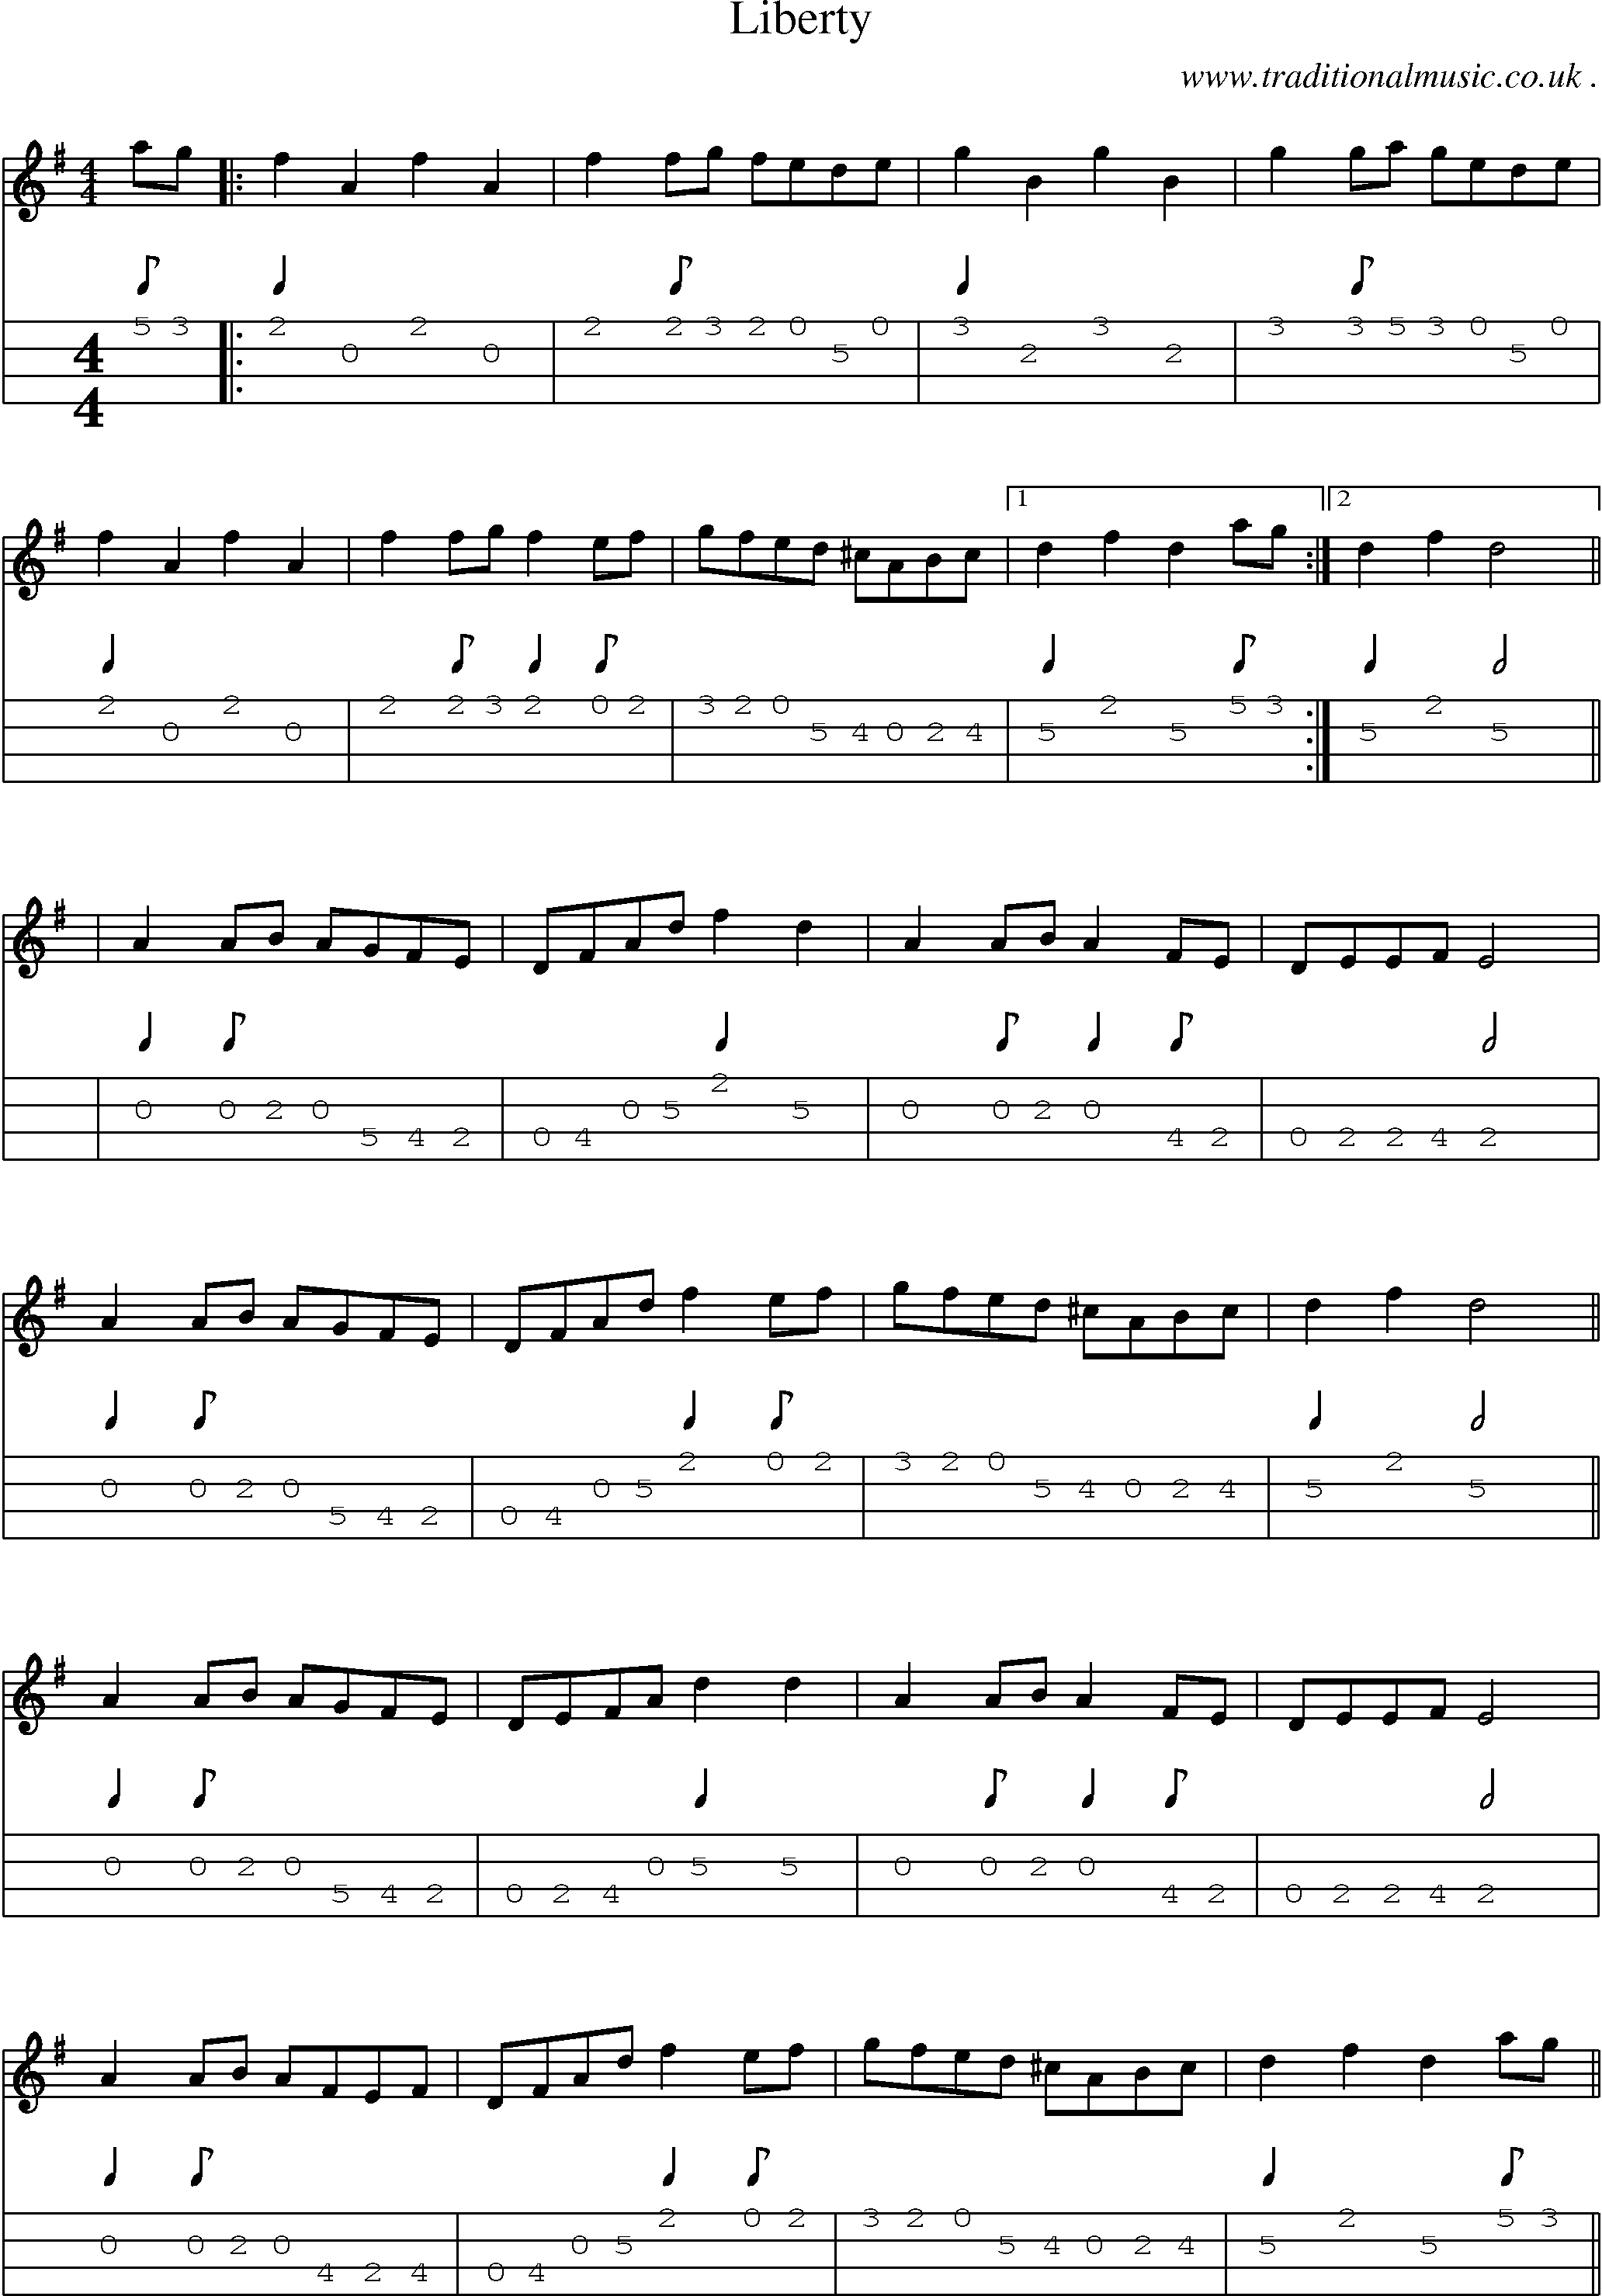 Music Score and Mandolin Tabs for Liberty